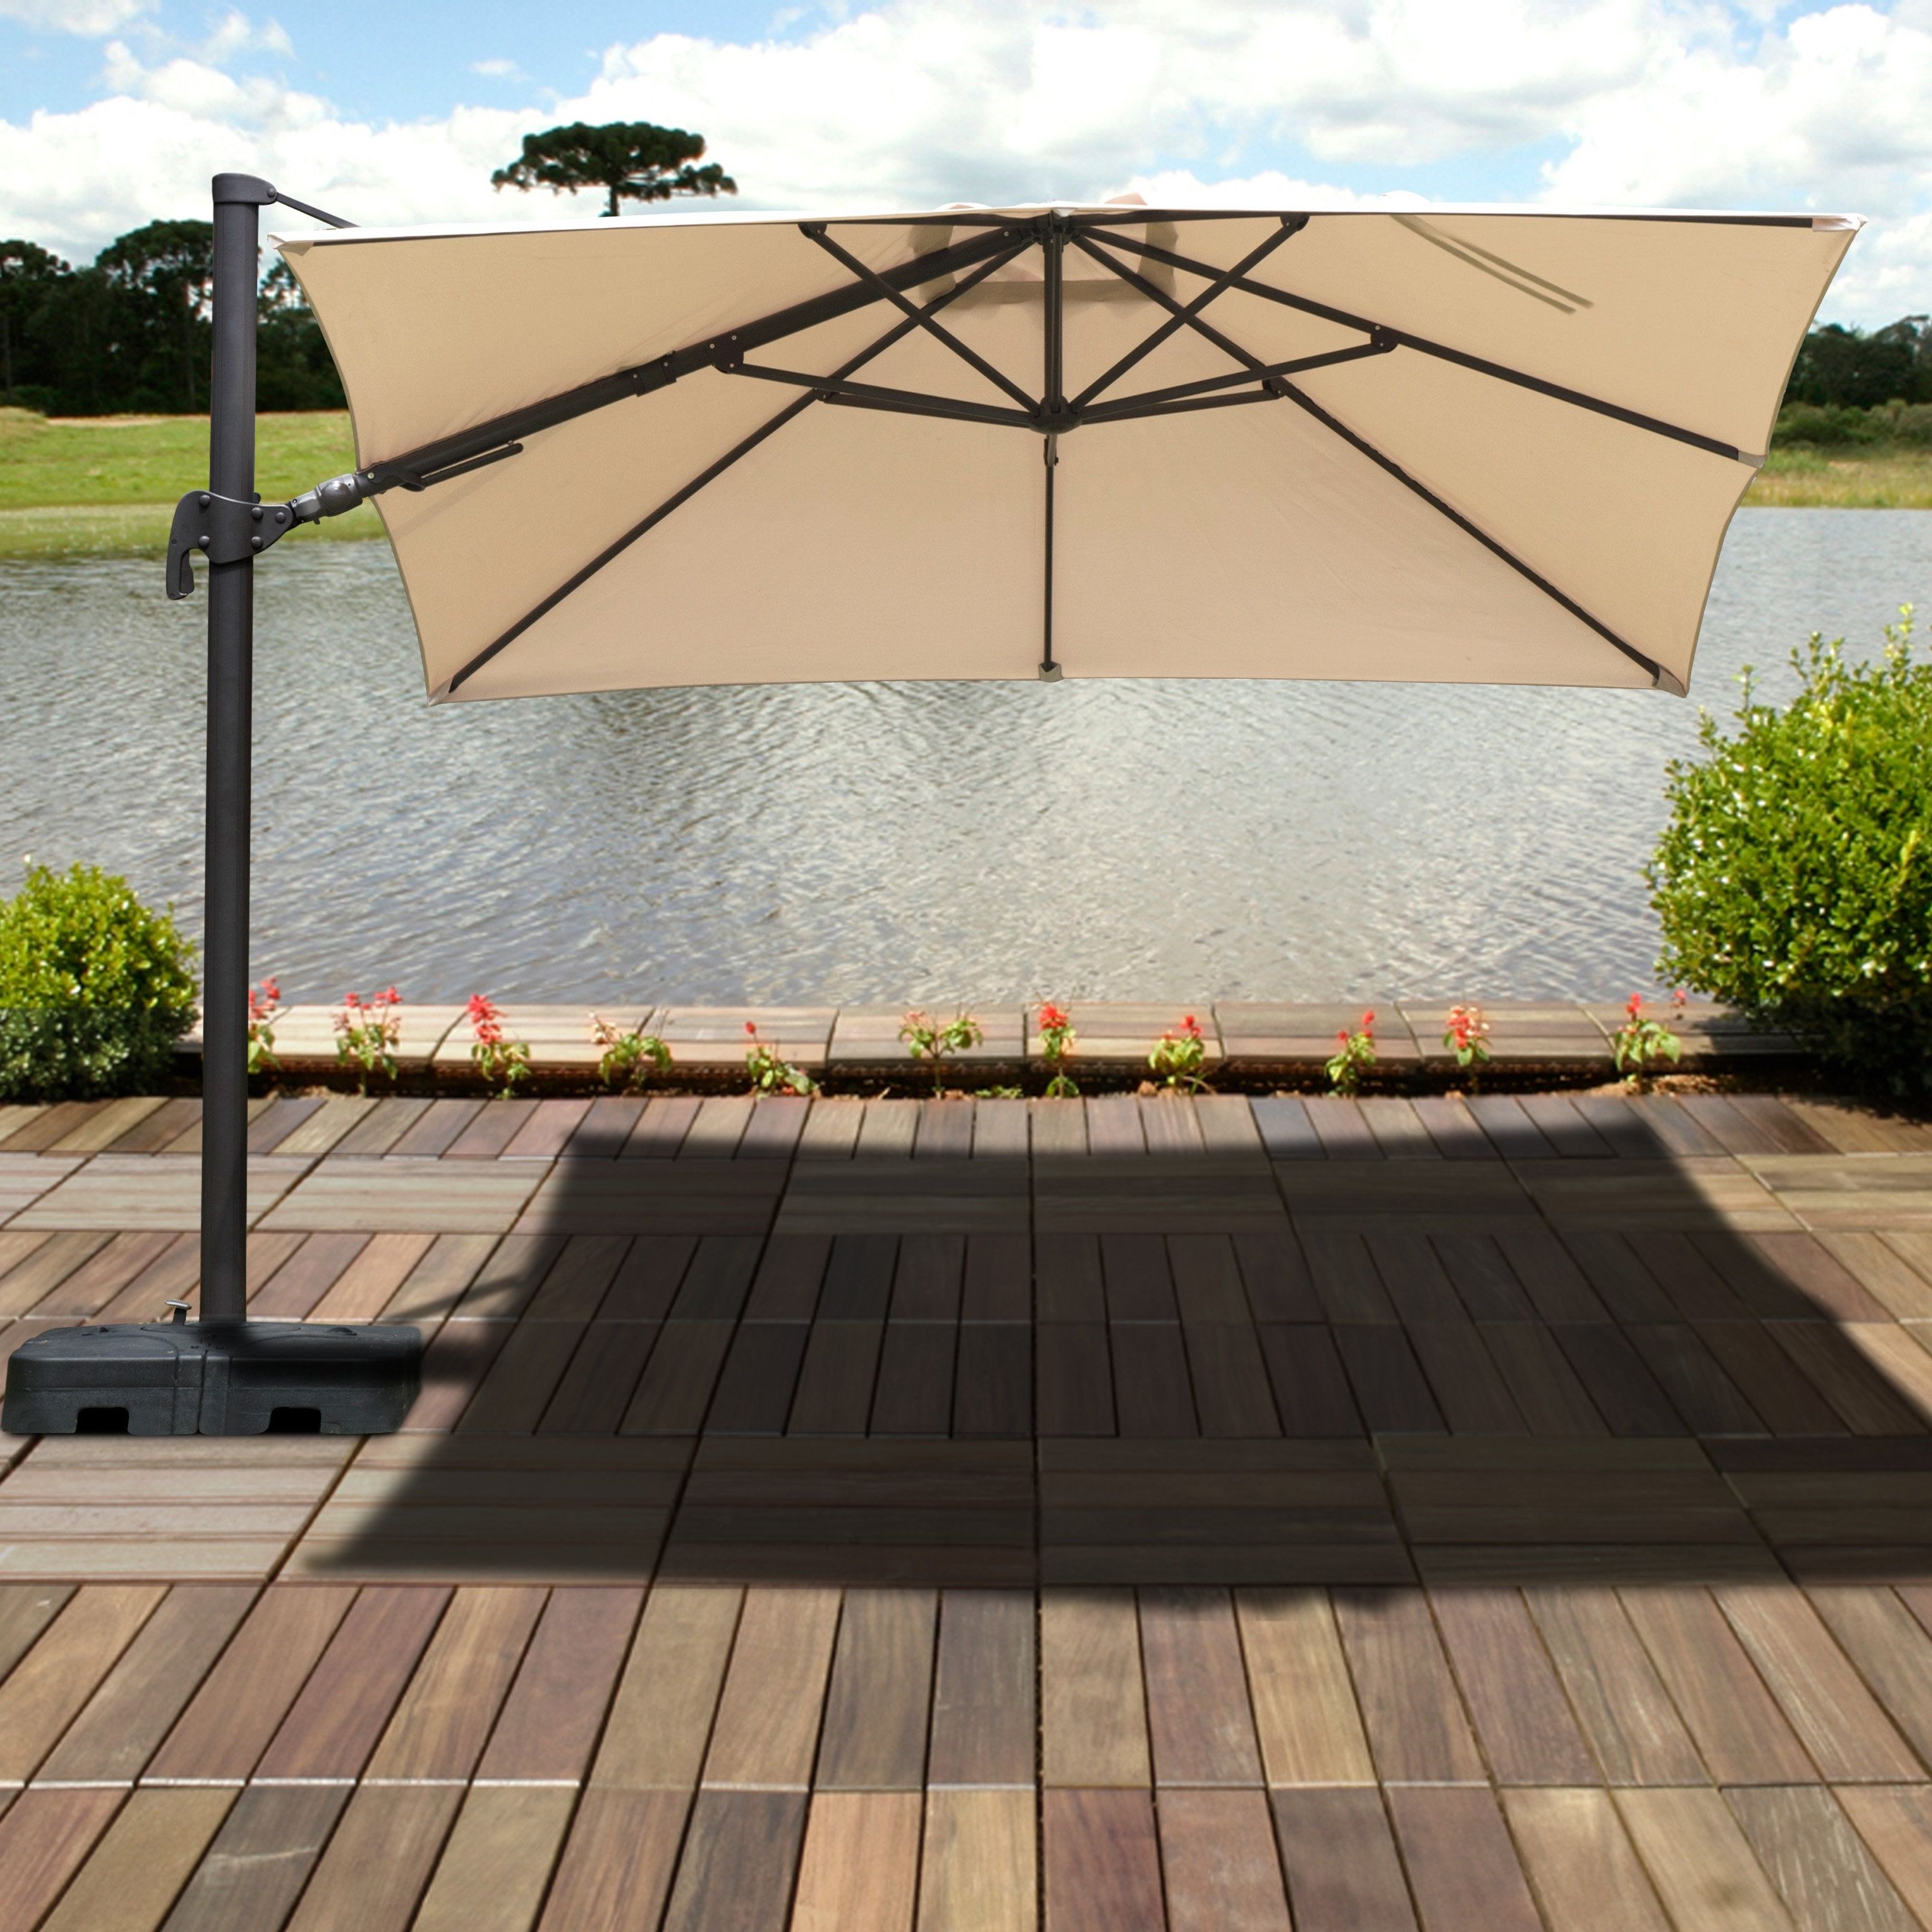 Gemmenne 10' Square Cantilever Umbrella With Regard To Trendy Boracay Square Cantilever Umbrellas (View 9 of 20)